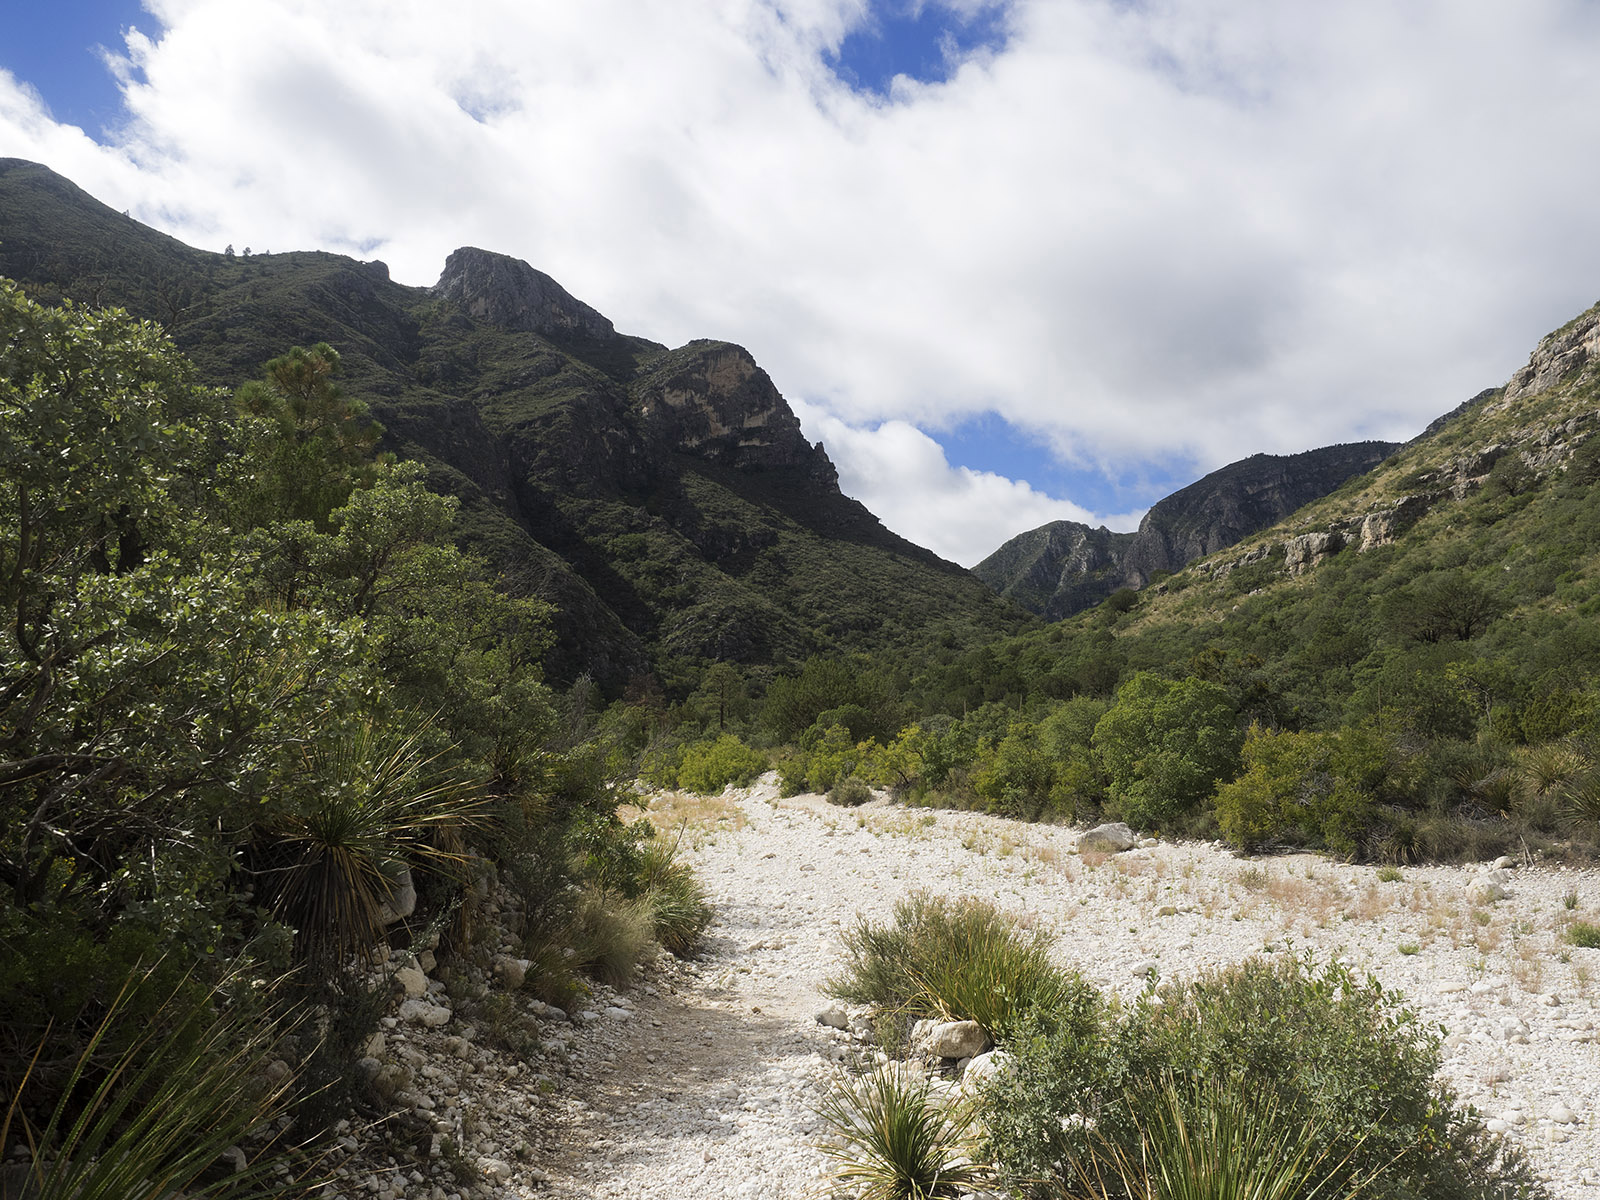 McKittrick Canyon trail offers a 7 mile hike up through sedimentary layers formed from the Capitan reef from the Permian Period.